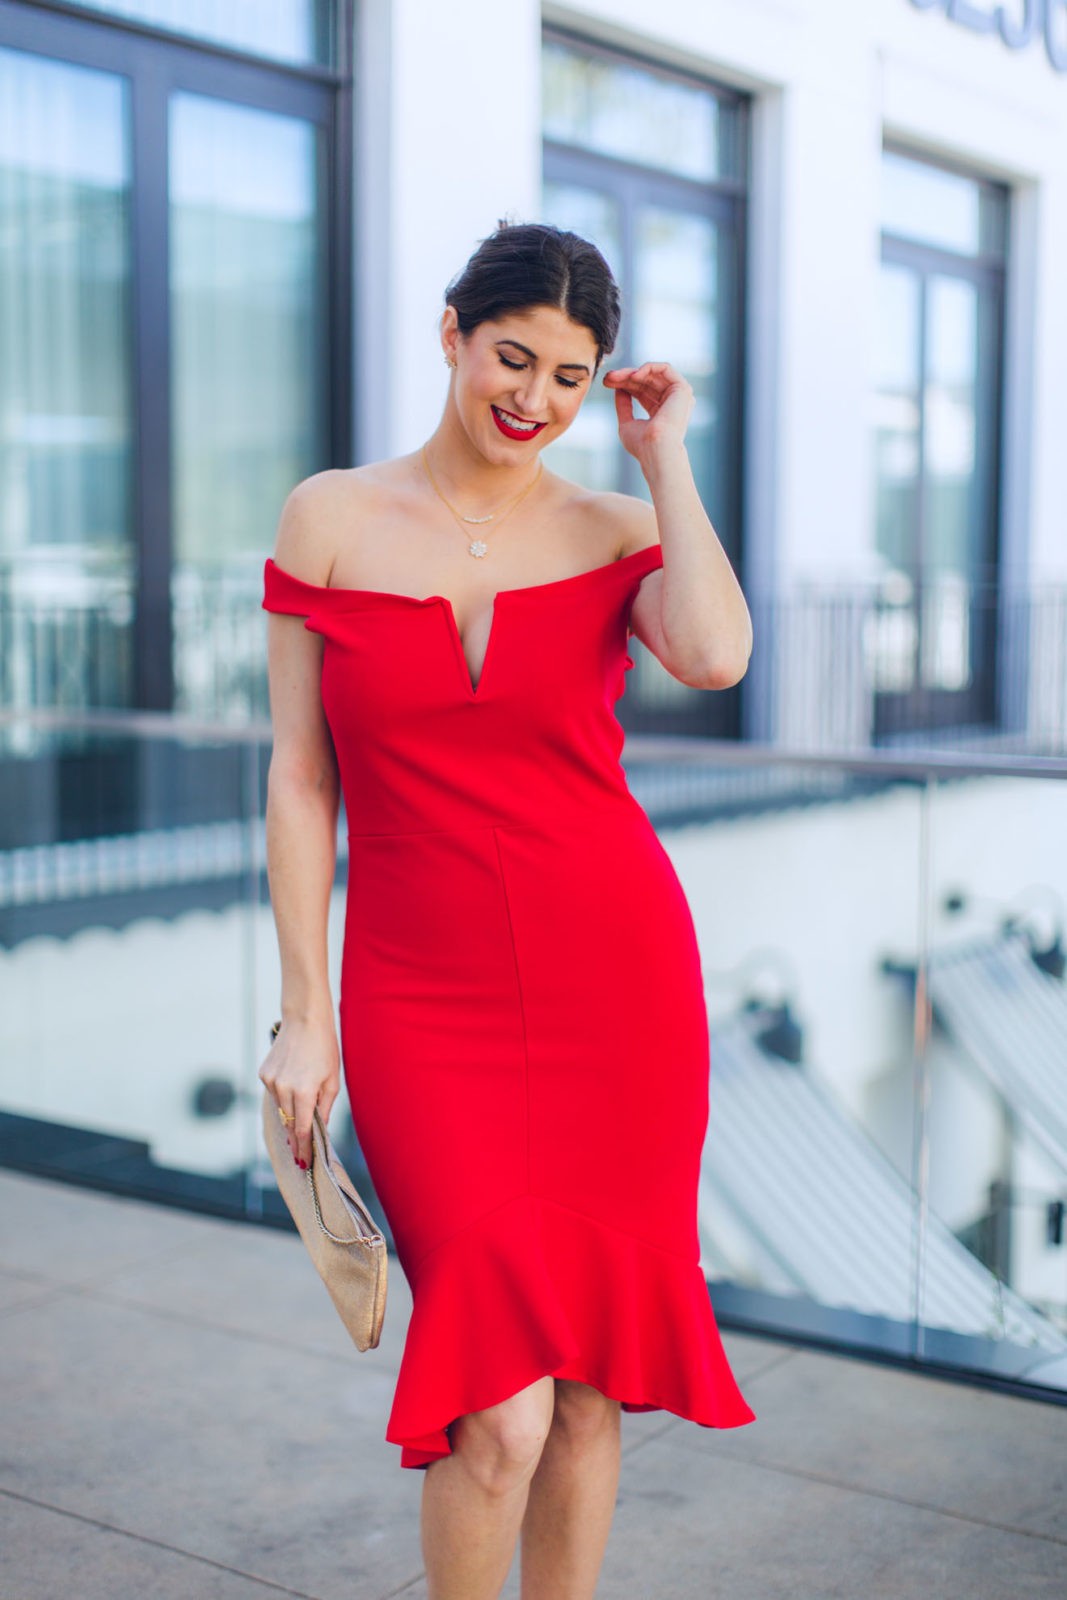 last minute Holiday outfit ideas | Nordstrom Buy Online Pick Up In Store | Missguided Red off the shoulder Dress | Gorjana Jewelry | Last minute gift ideas | Holiday Outfit Ideas Video featured by top Los Angeles fashion blog Laura Lily